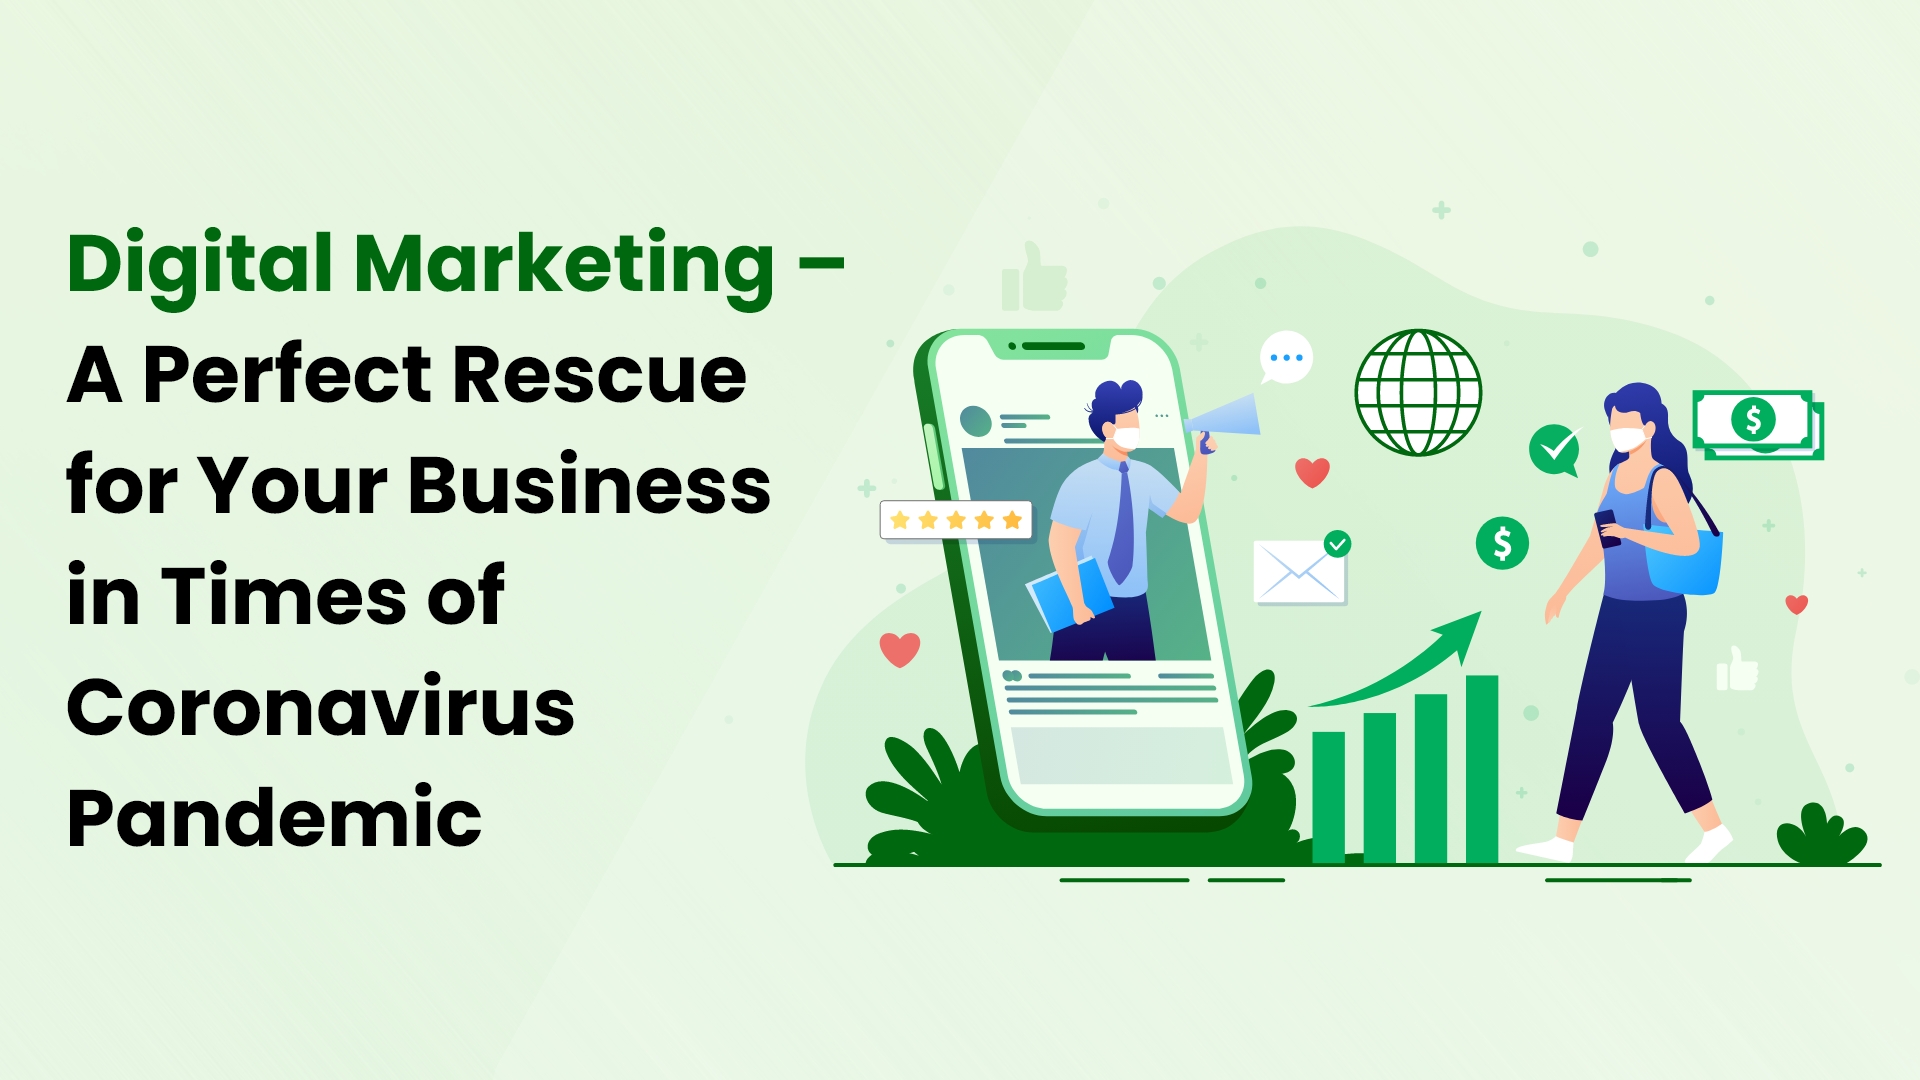 Digital Marketing –A Perfect Rescue for Your Business in Times of Coronavirus Pandemic